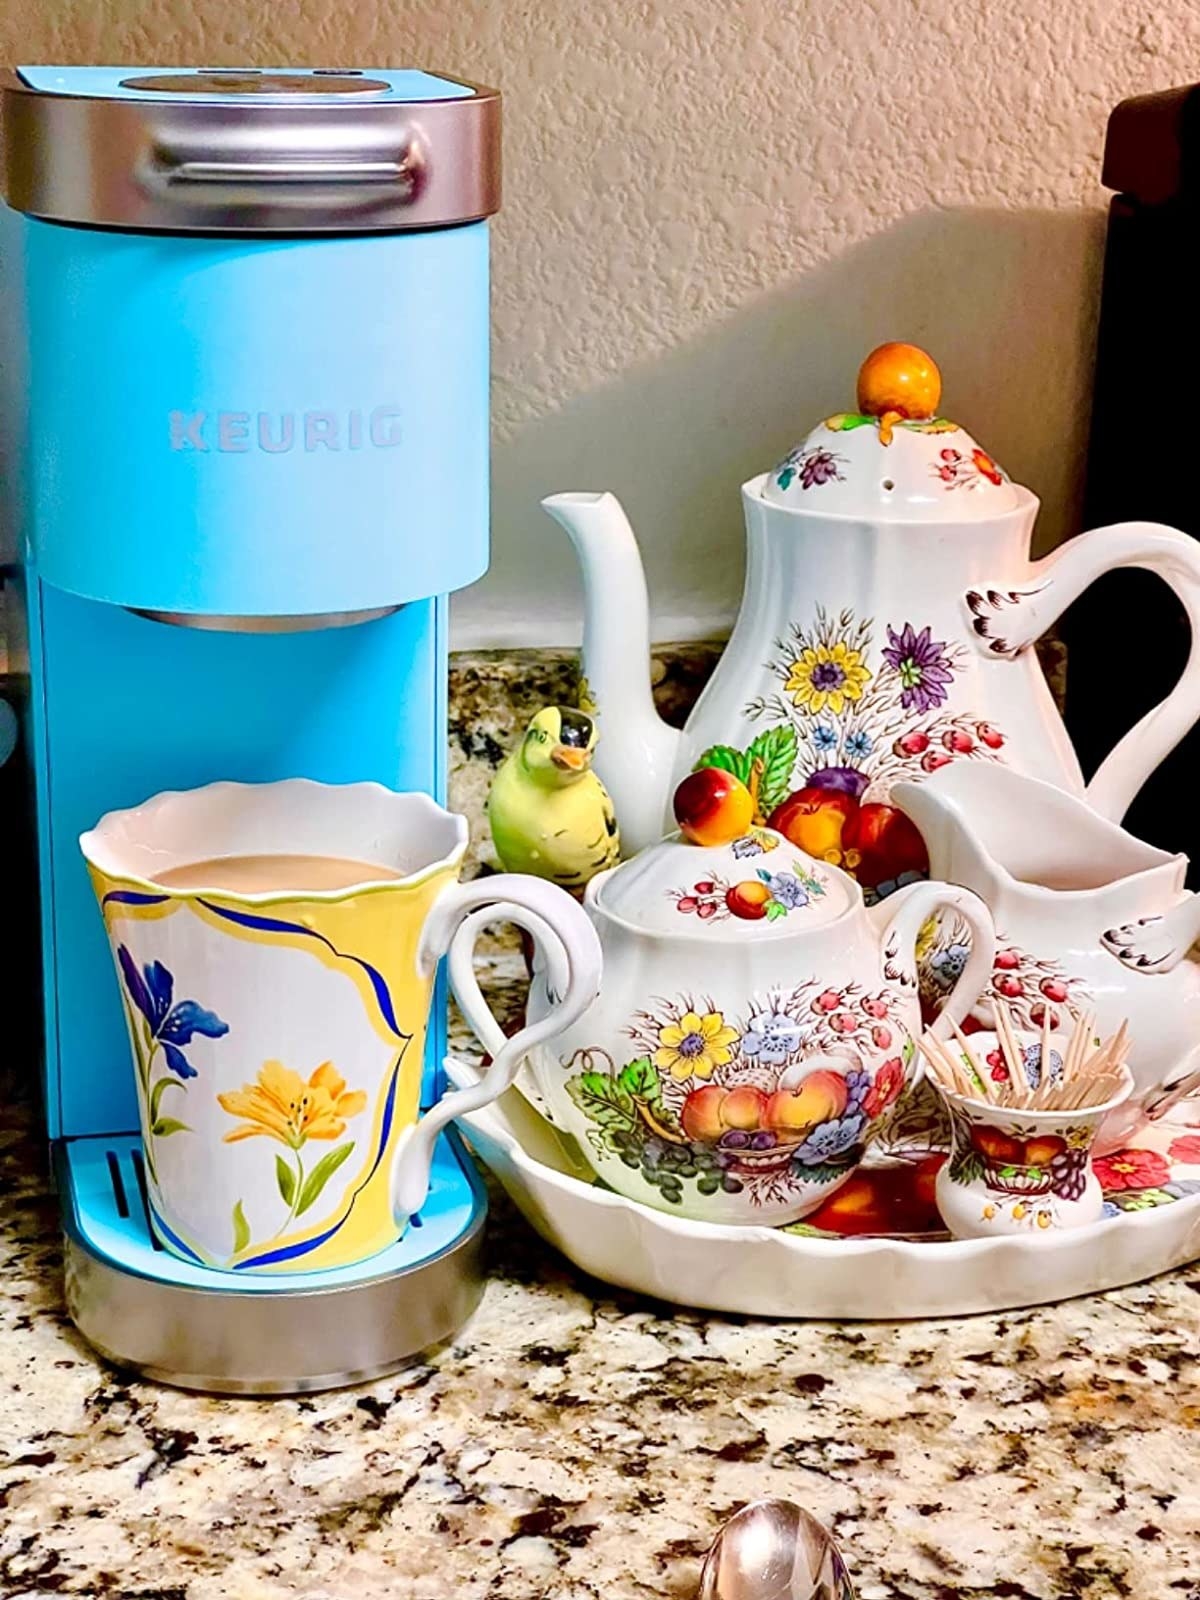 Reviewer image of blue Keurig with a colorful cup in it and a tea set next to it